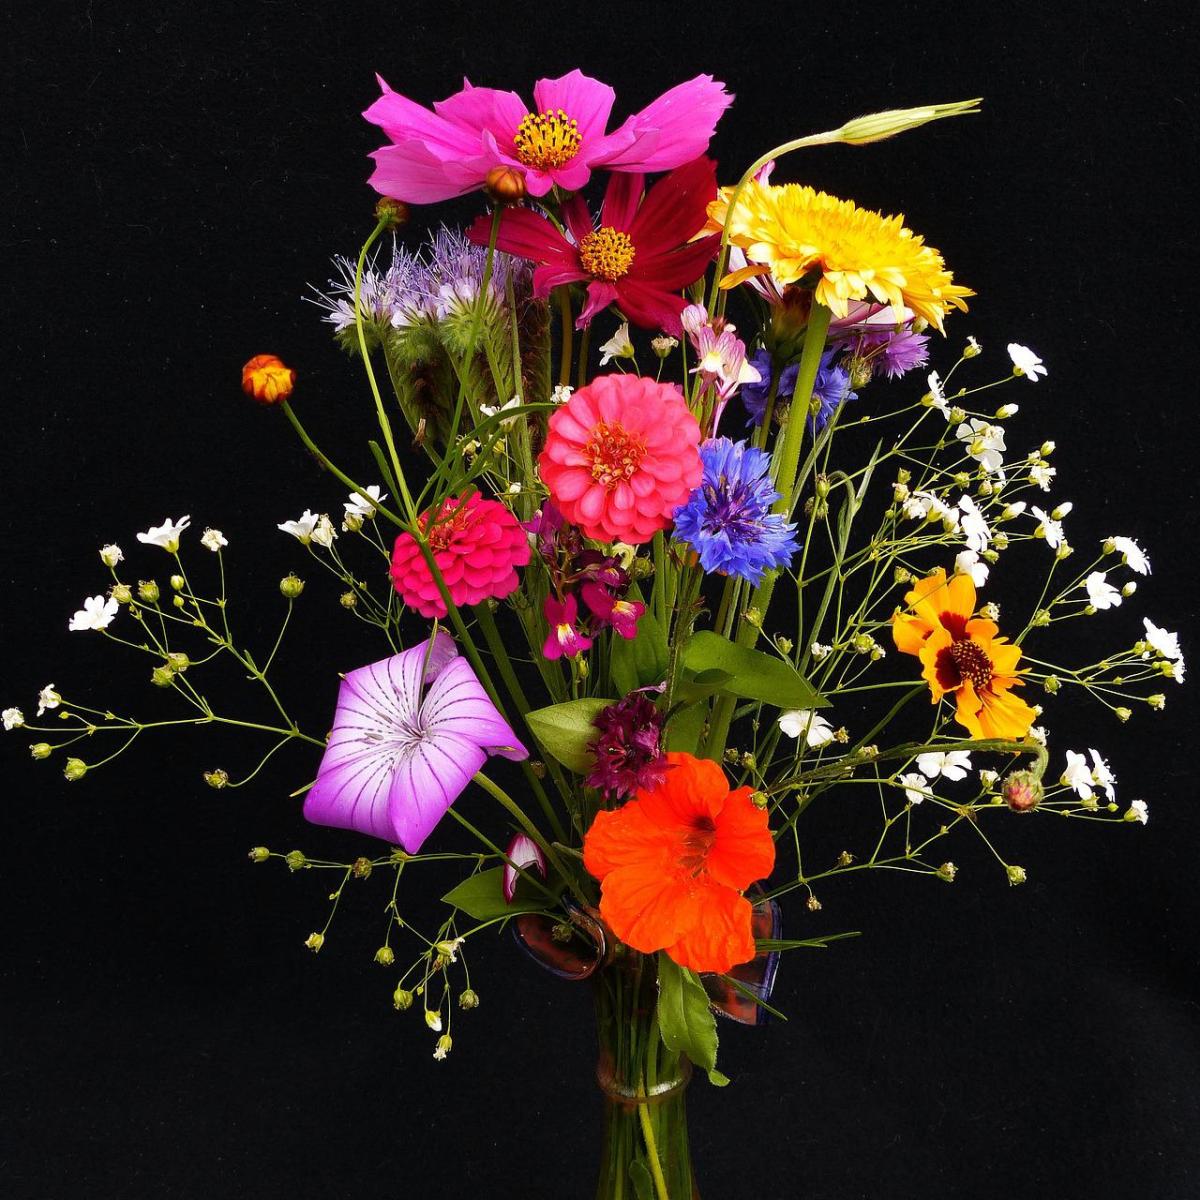 Pick some "wild" flowers like nasturtiums, zinnia, and cosmos from around your garden to create a floral bouquet to brighten someone's day. 